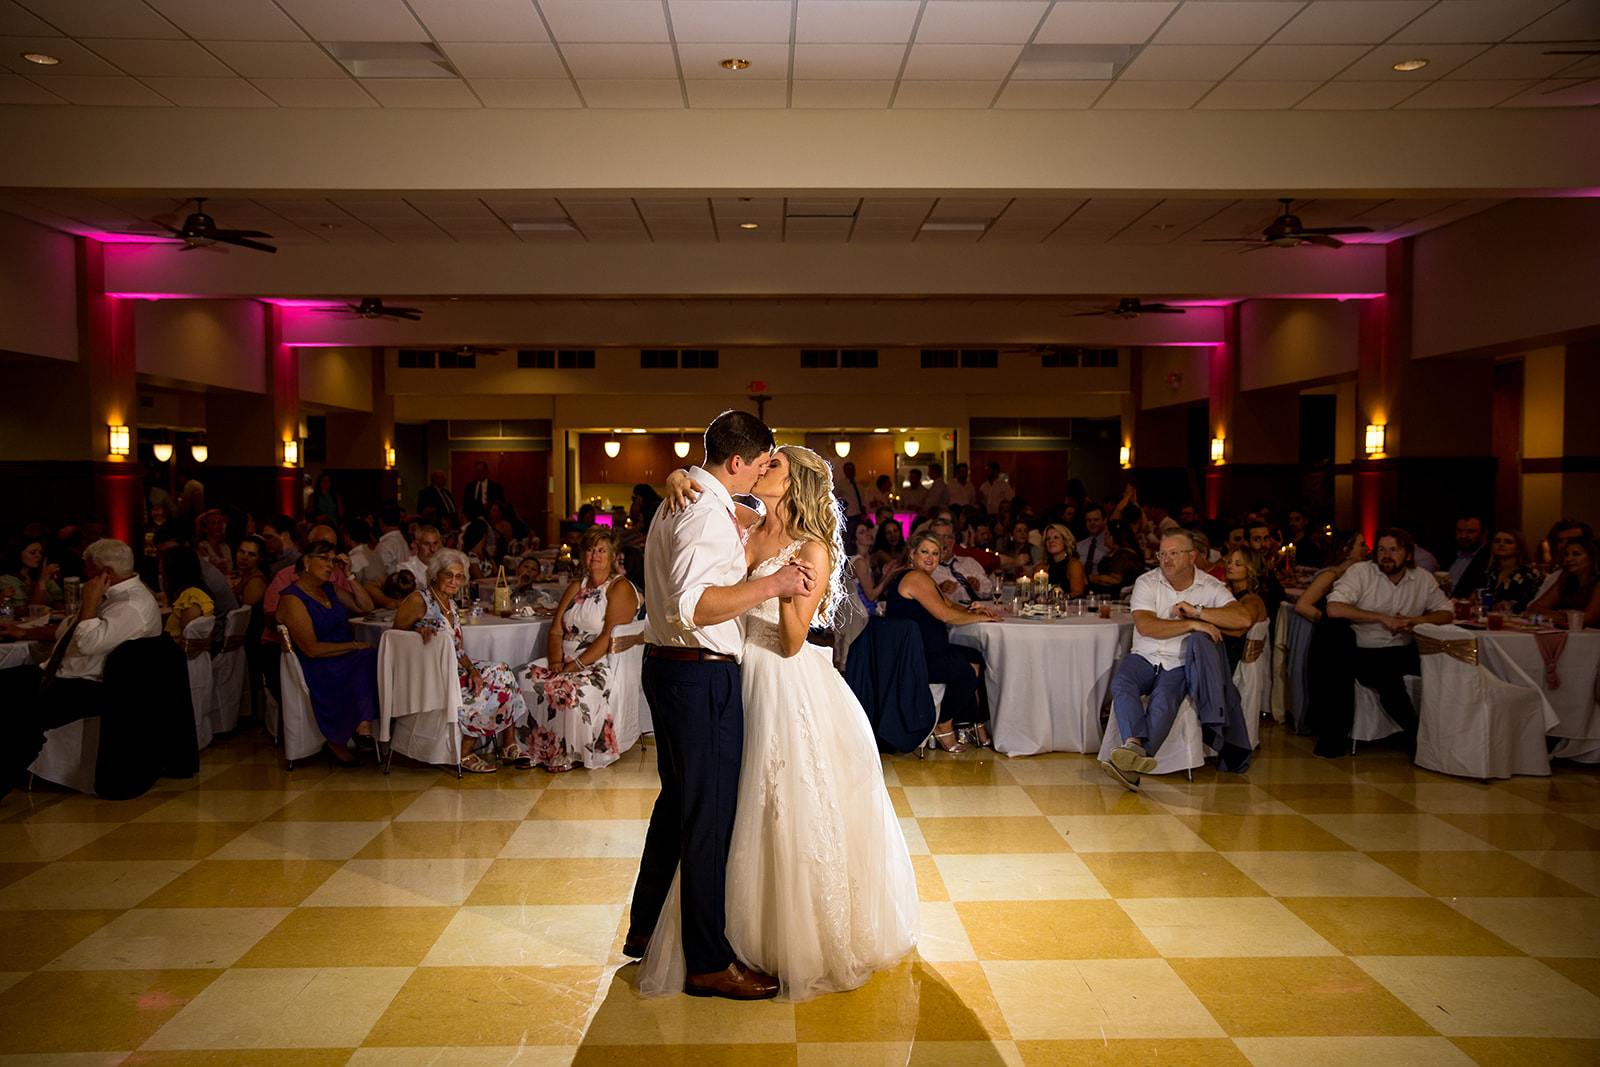 Wedding couple share first dance during their reception in Northern Kentucky